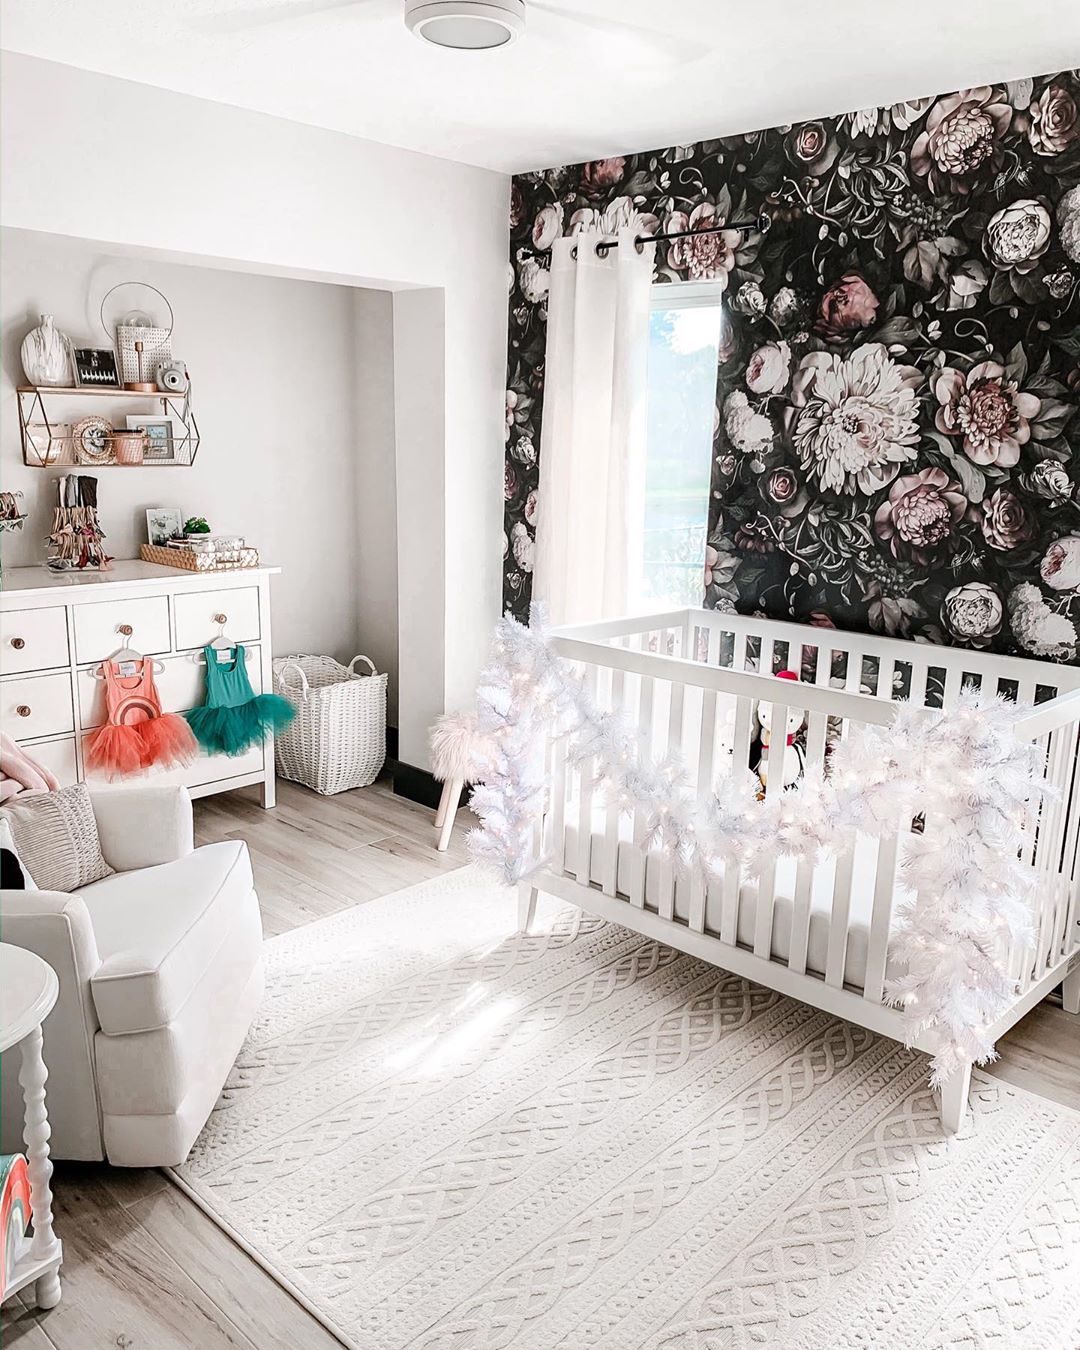 White nursery with black floral wall. Photo by Instagram user @the_floridagirl